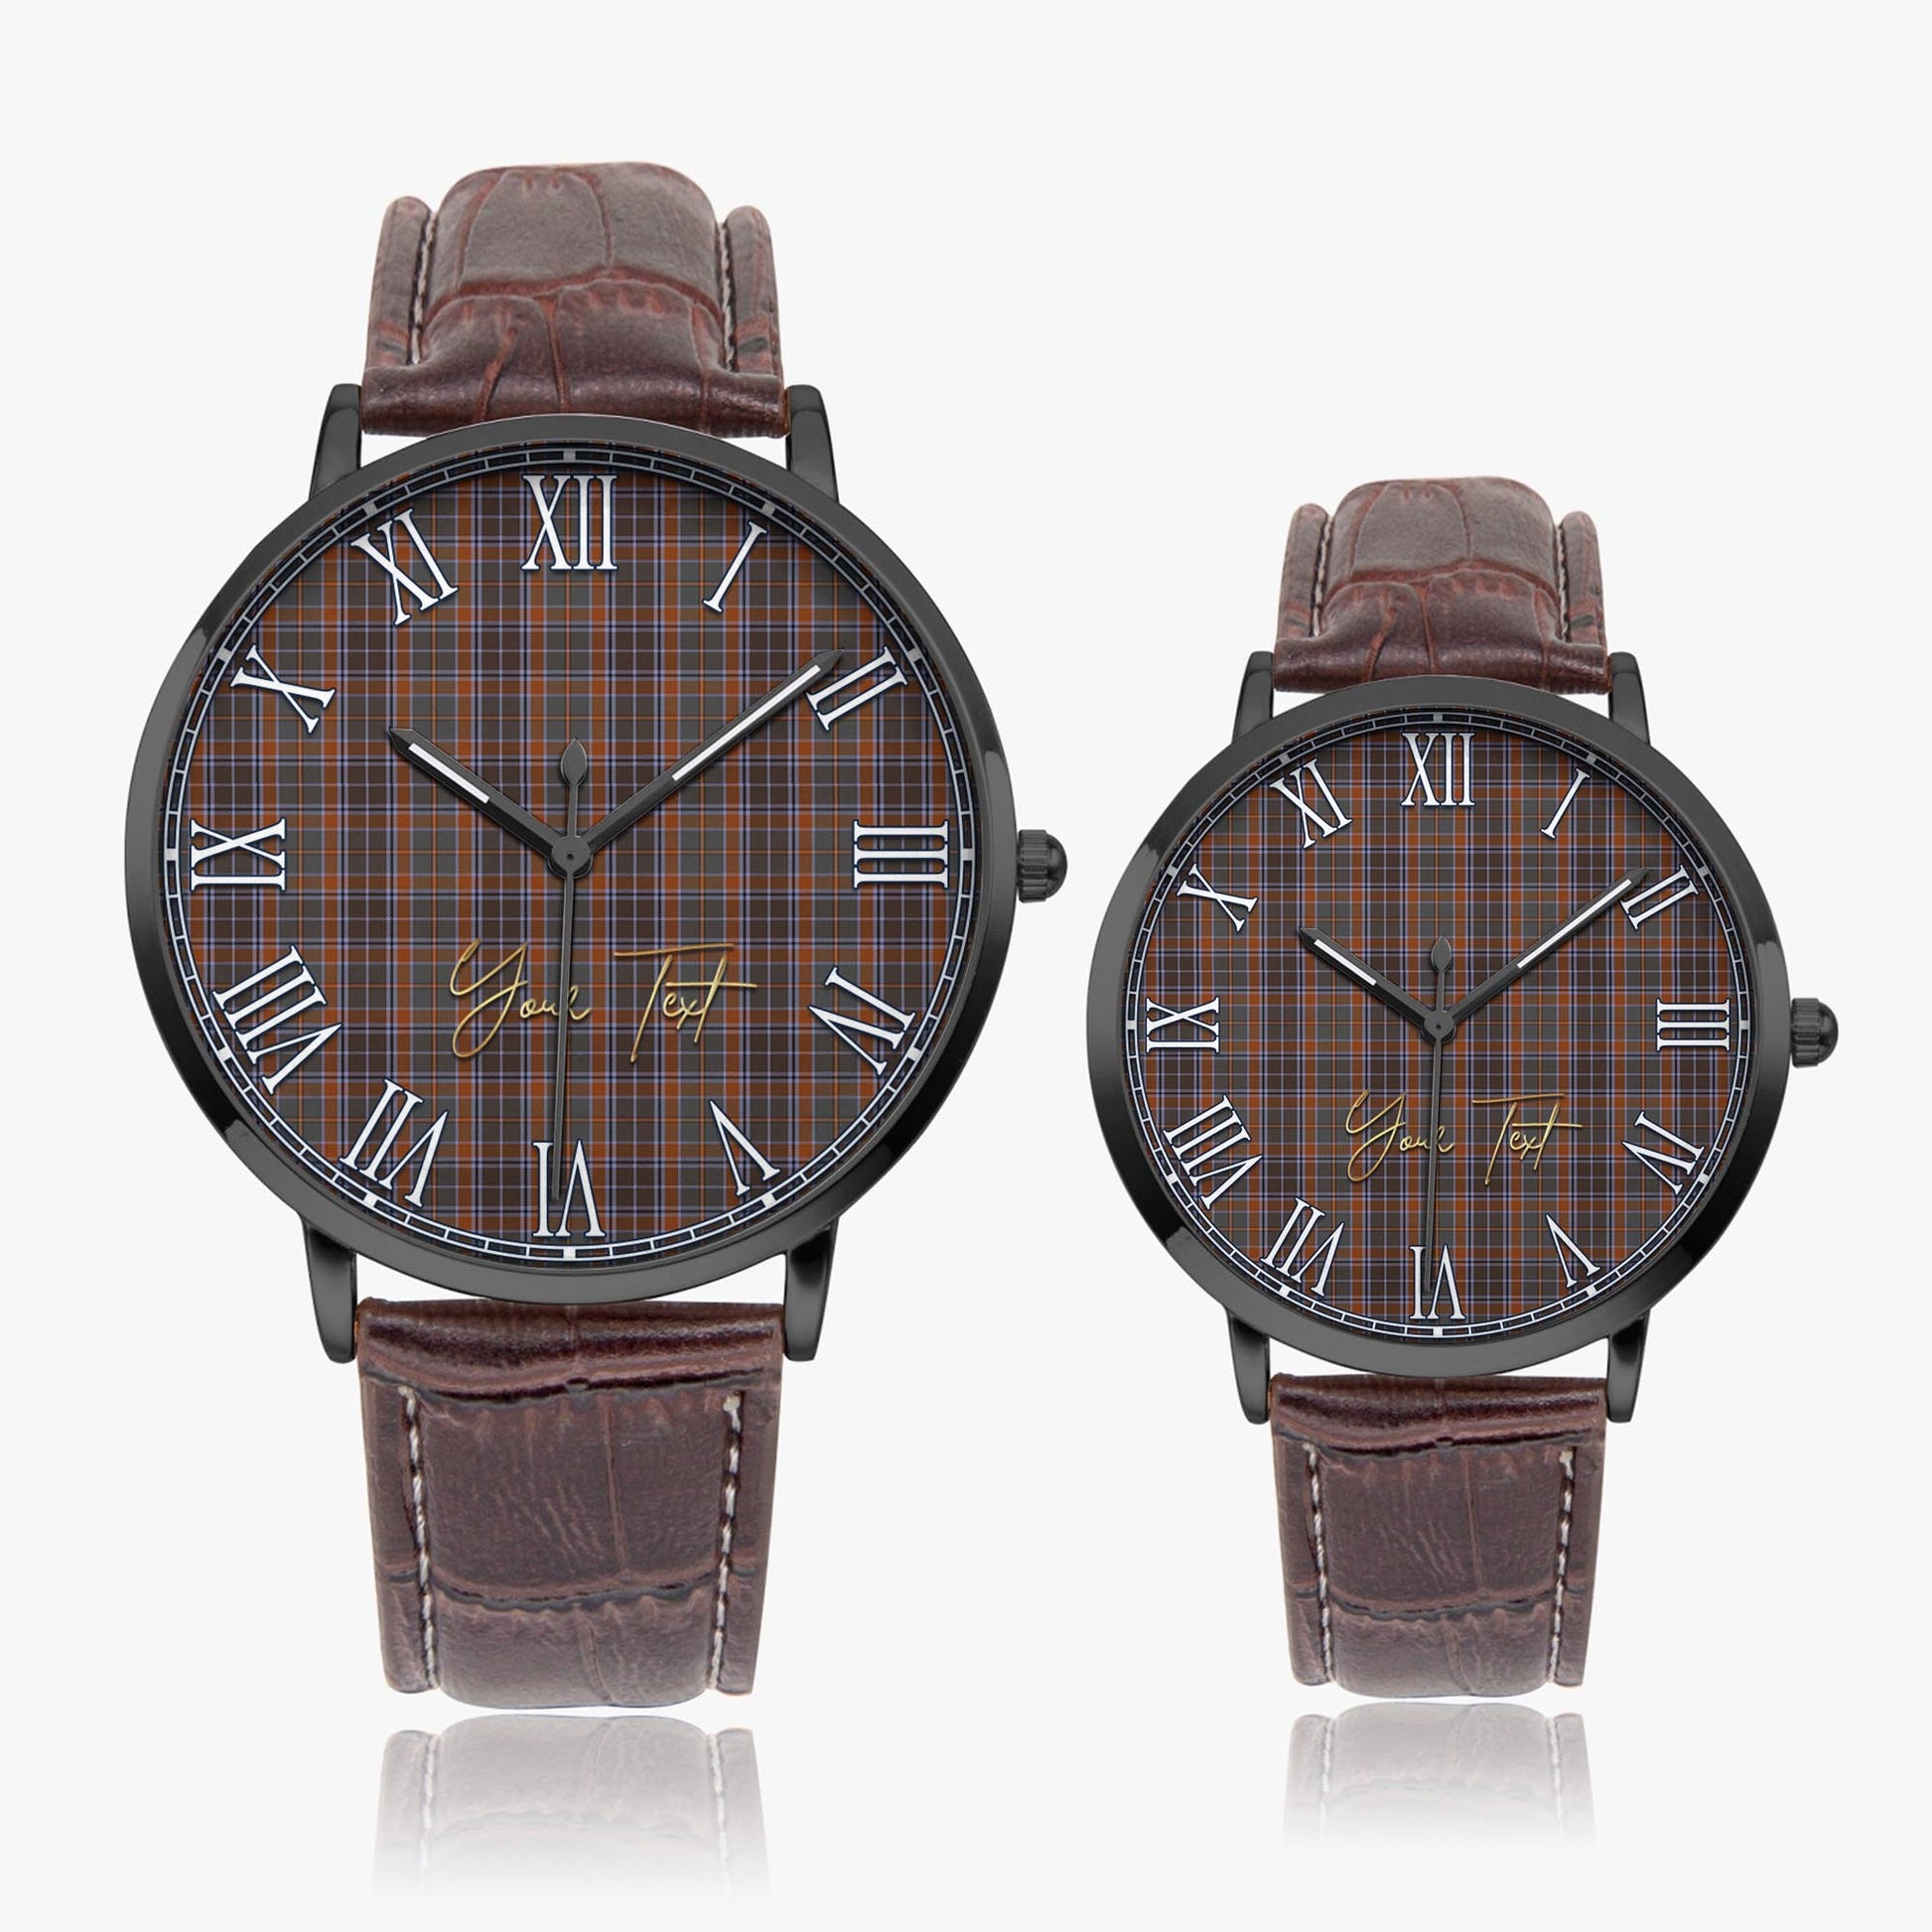 Leitrim County Ireland Tartan Personalized Your Text Leather Trap Quartz Watch Ultra Thin Black Case With Brown Leather Strap - Tartanvibesclothing